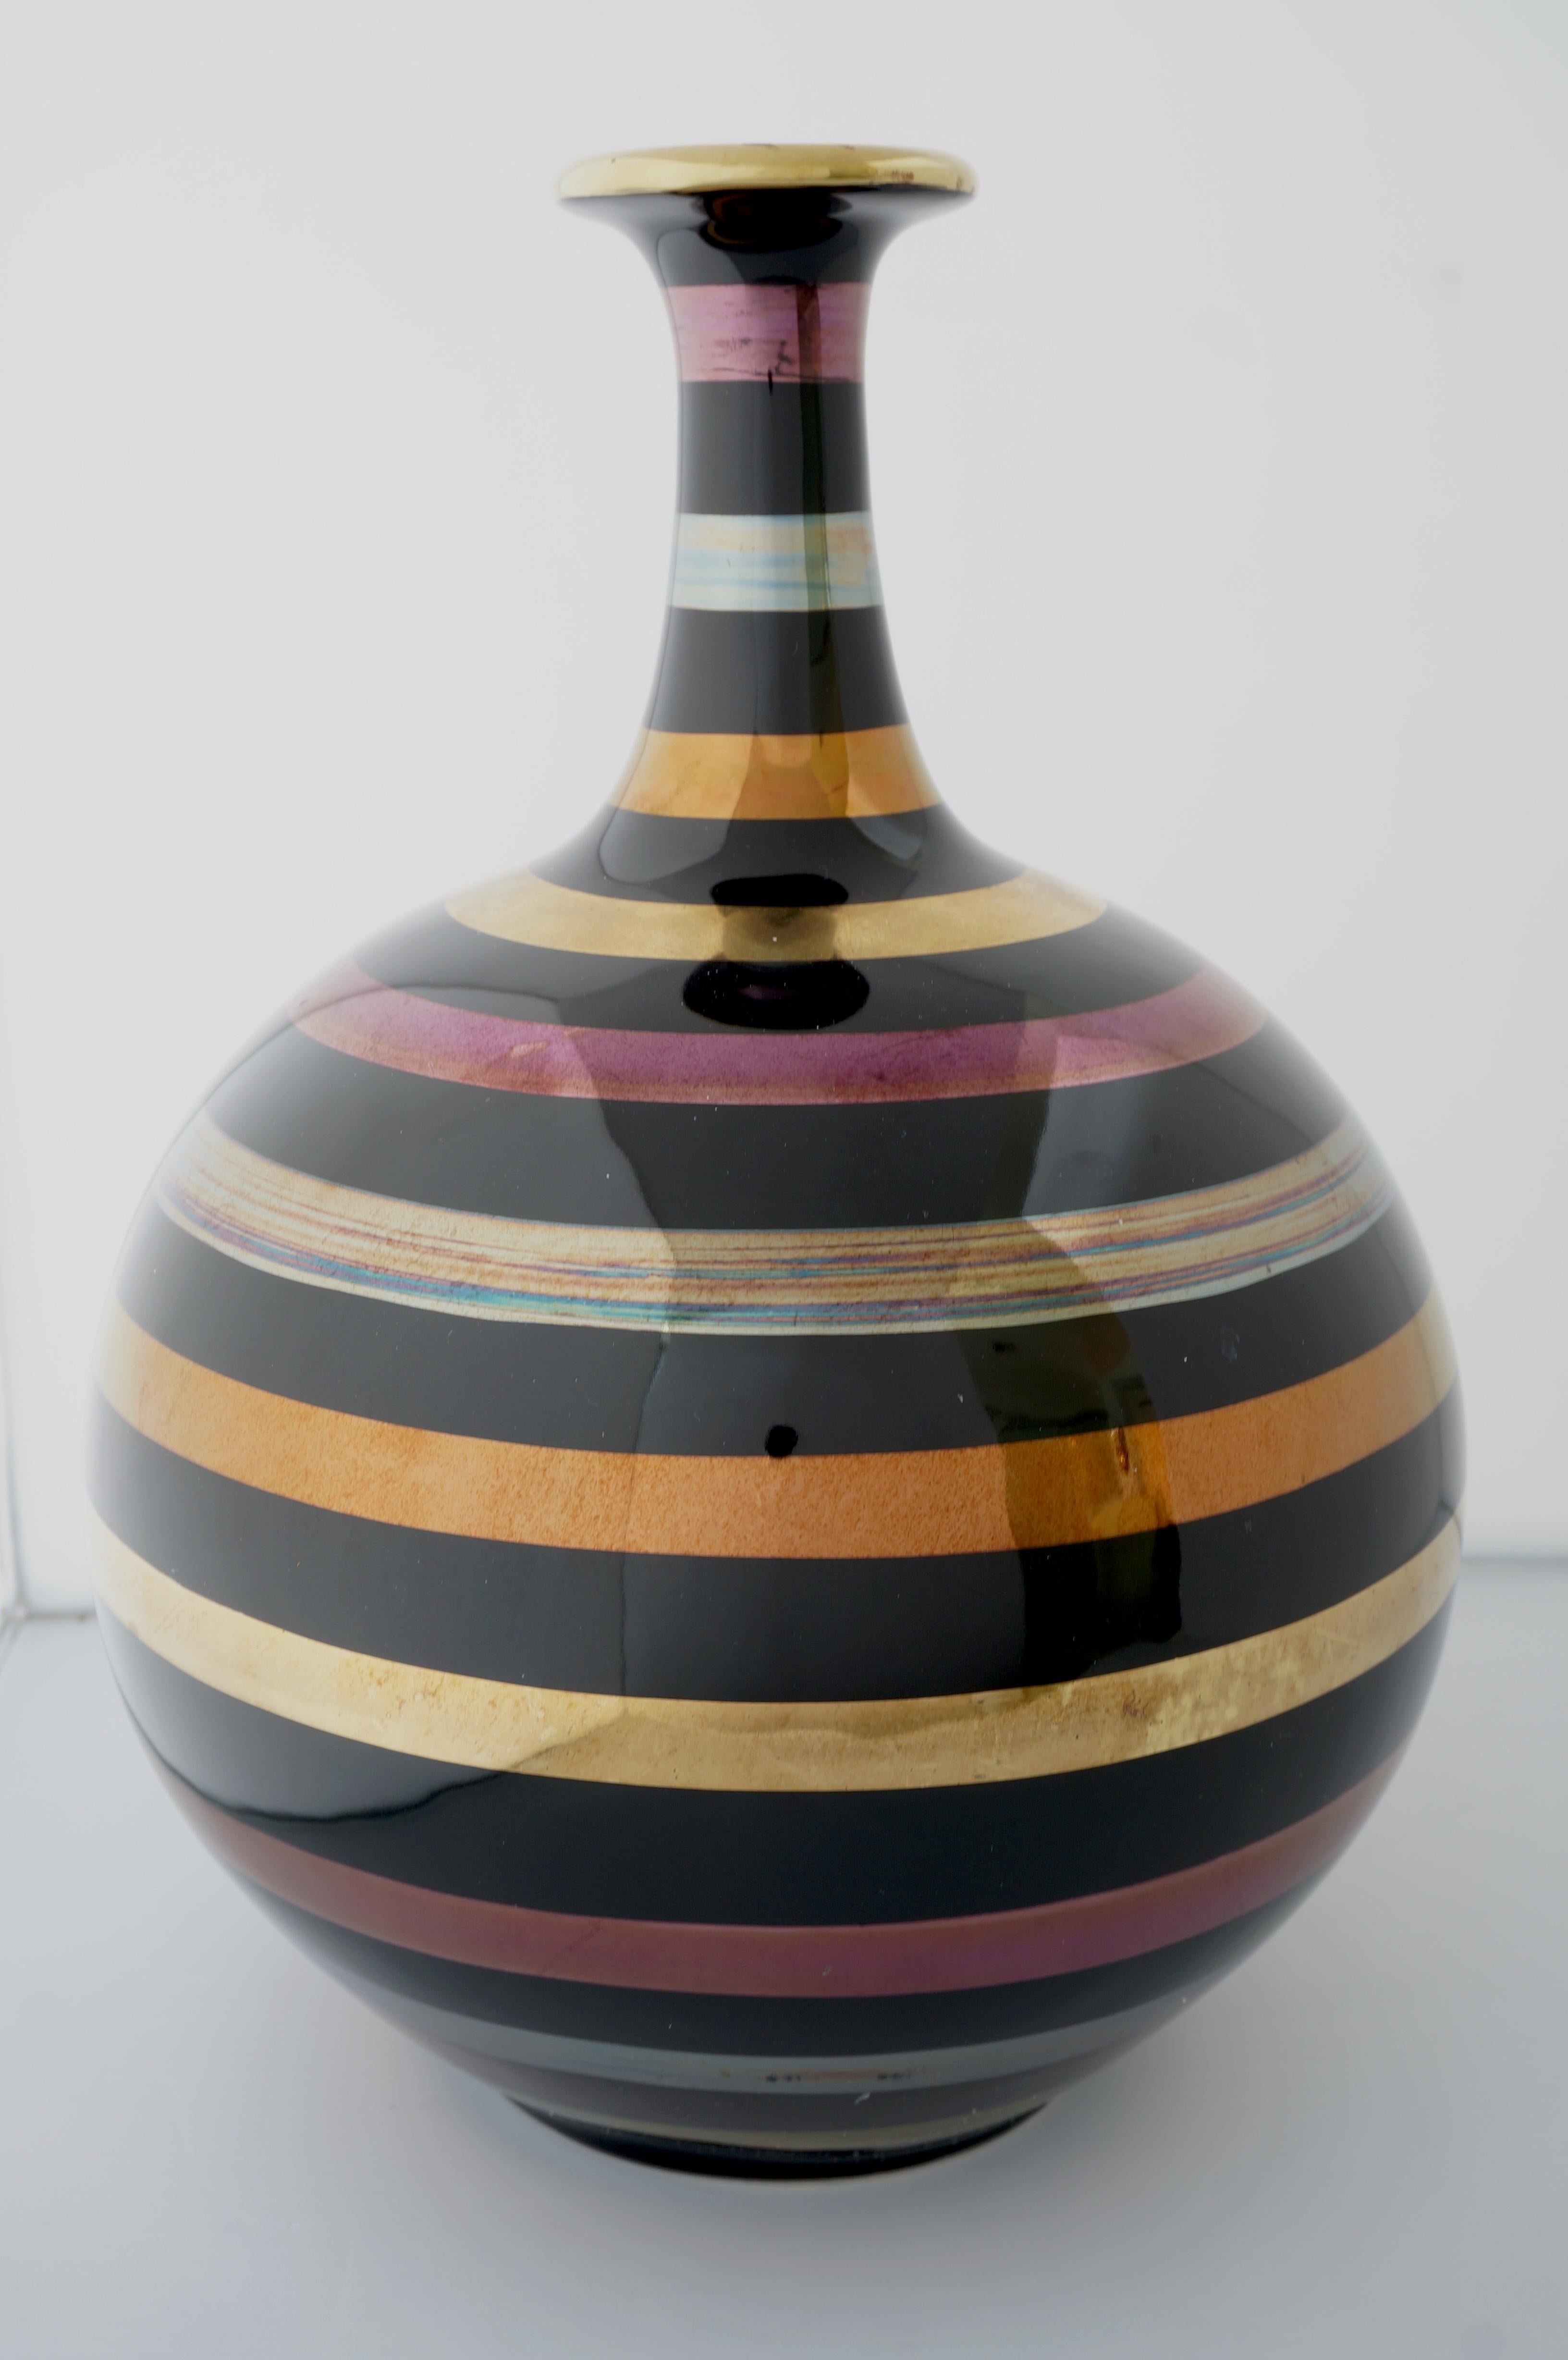 This stylish and chic glazed ceramic vase is is finished with bands of 24k gold, silver and copper.  The piece makes a subtle statement with its form and use of materials.  